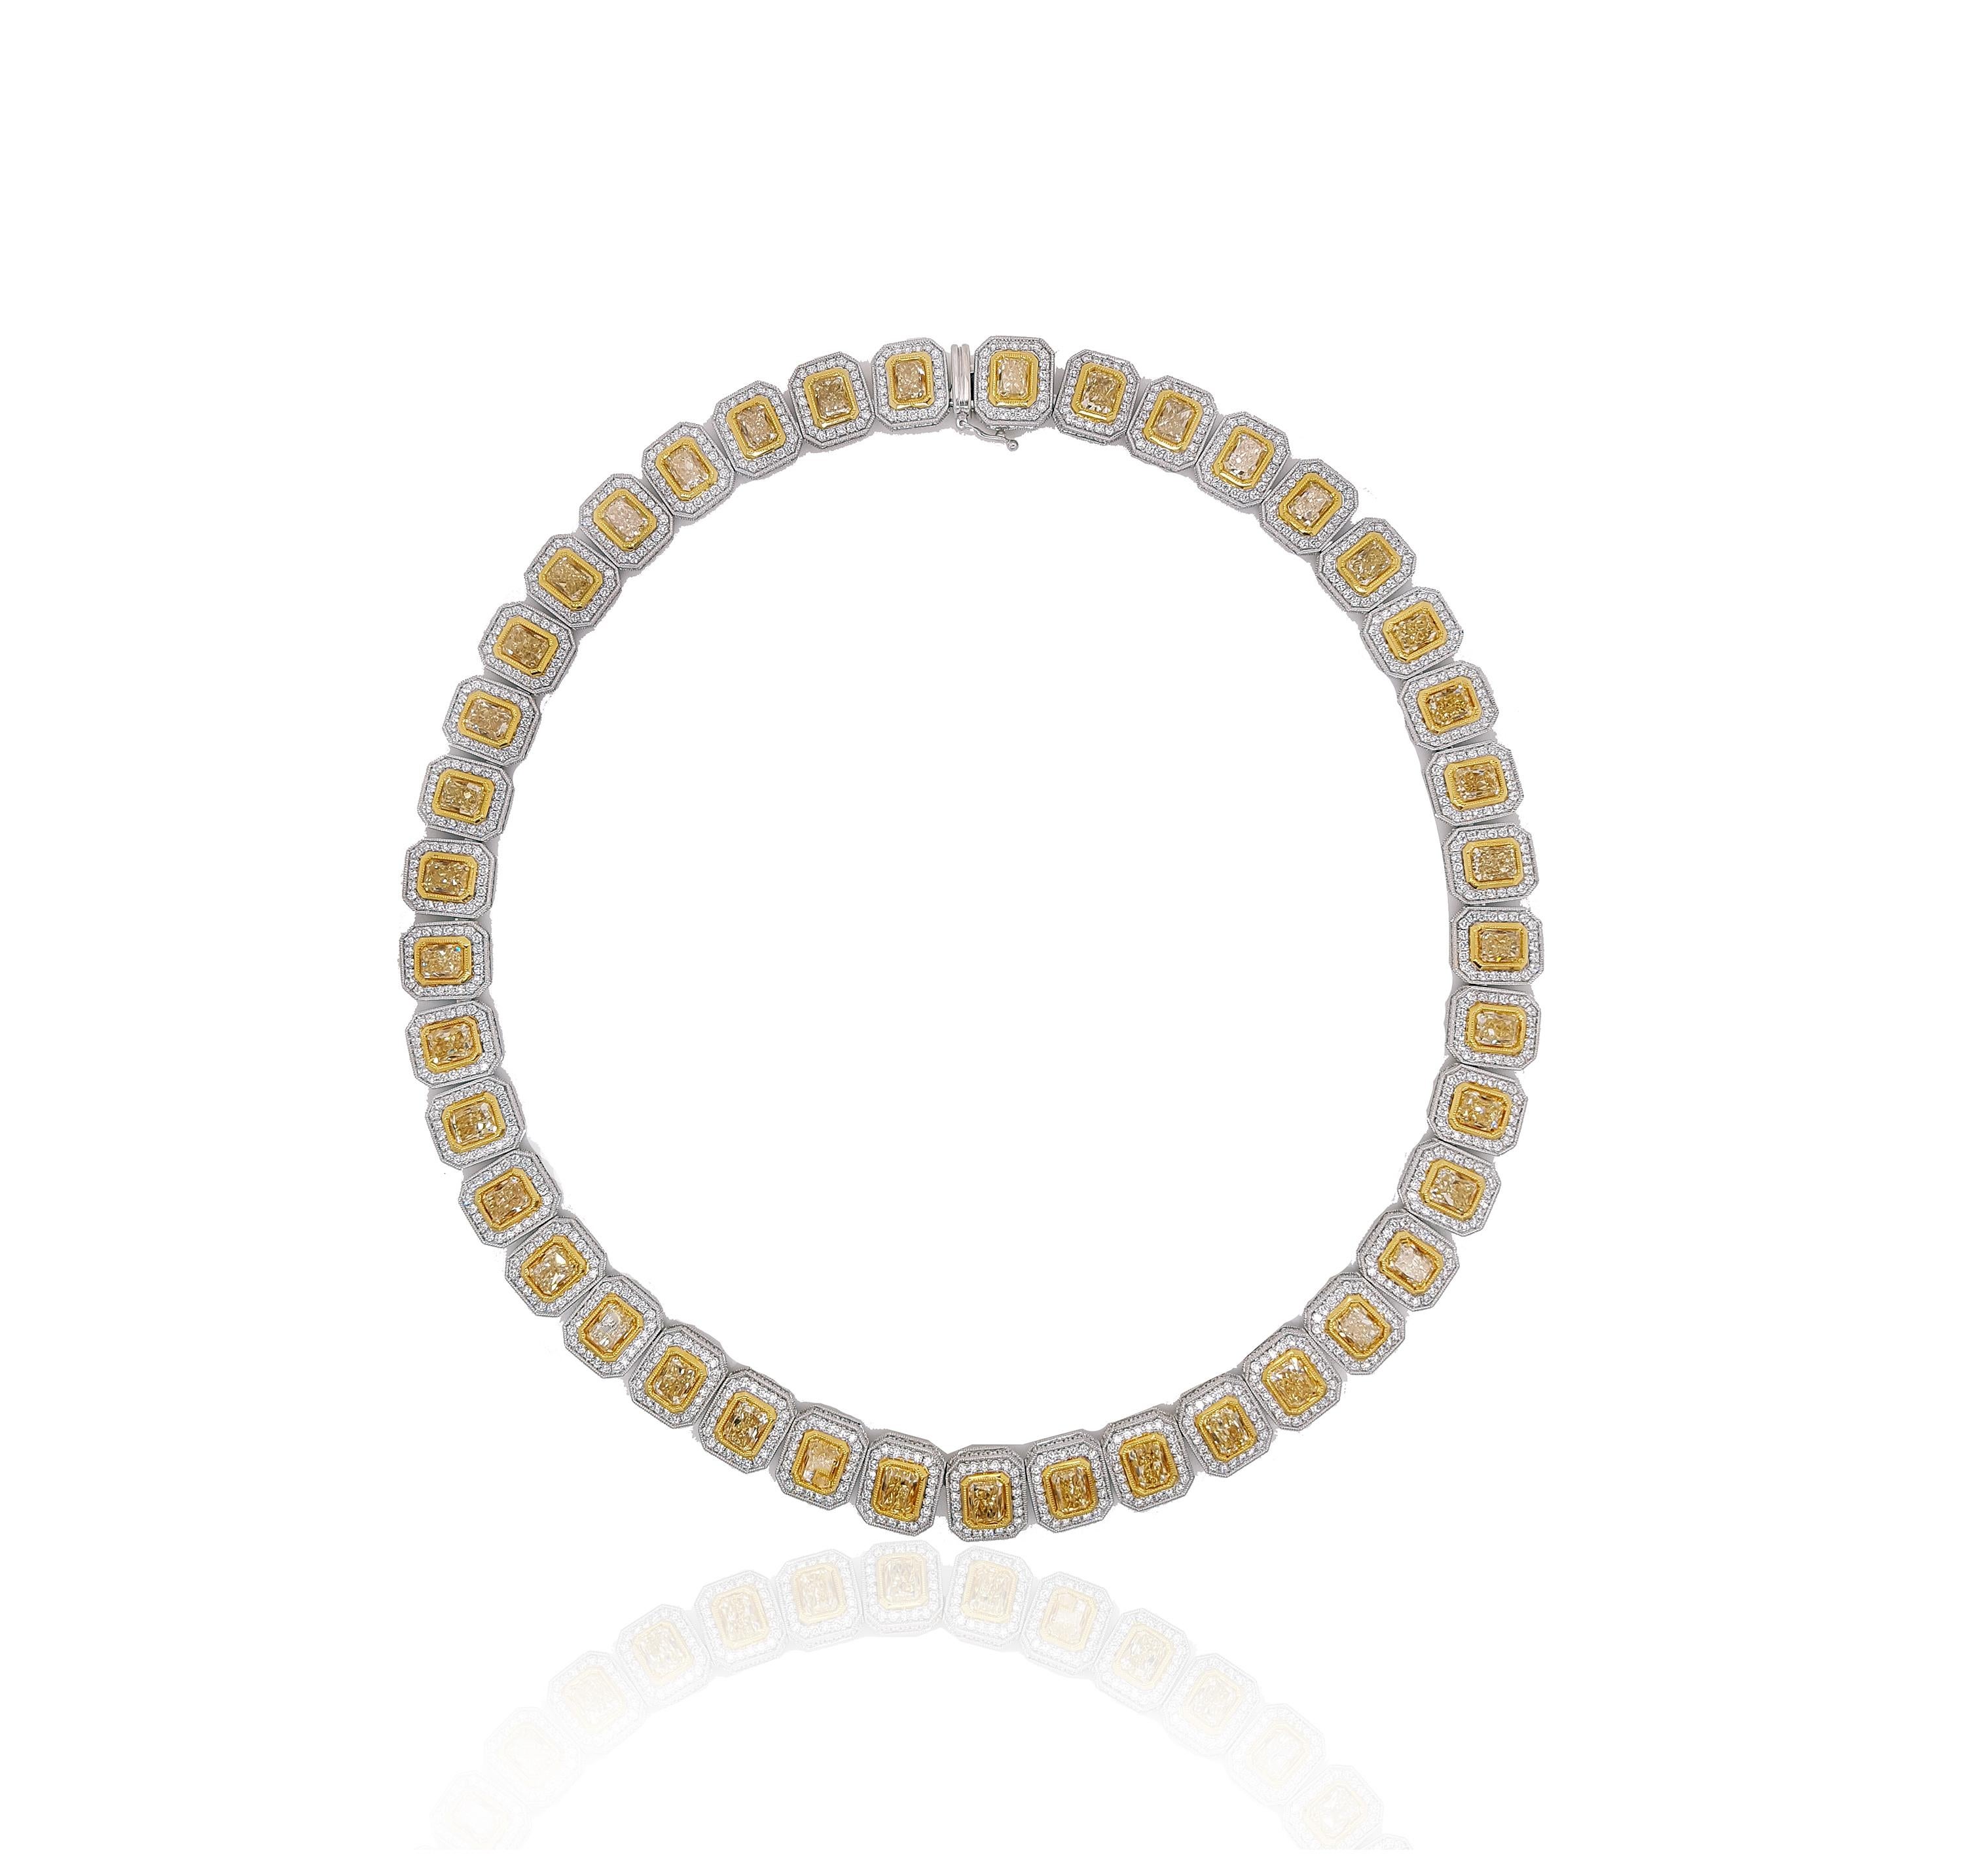 Radiant Cut 37 Carat Yellow and White Diamond Halo Eternity Necklace, Set in 18k Gold For Sale